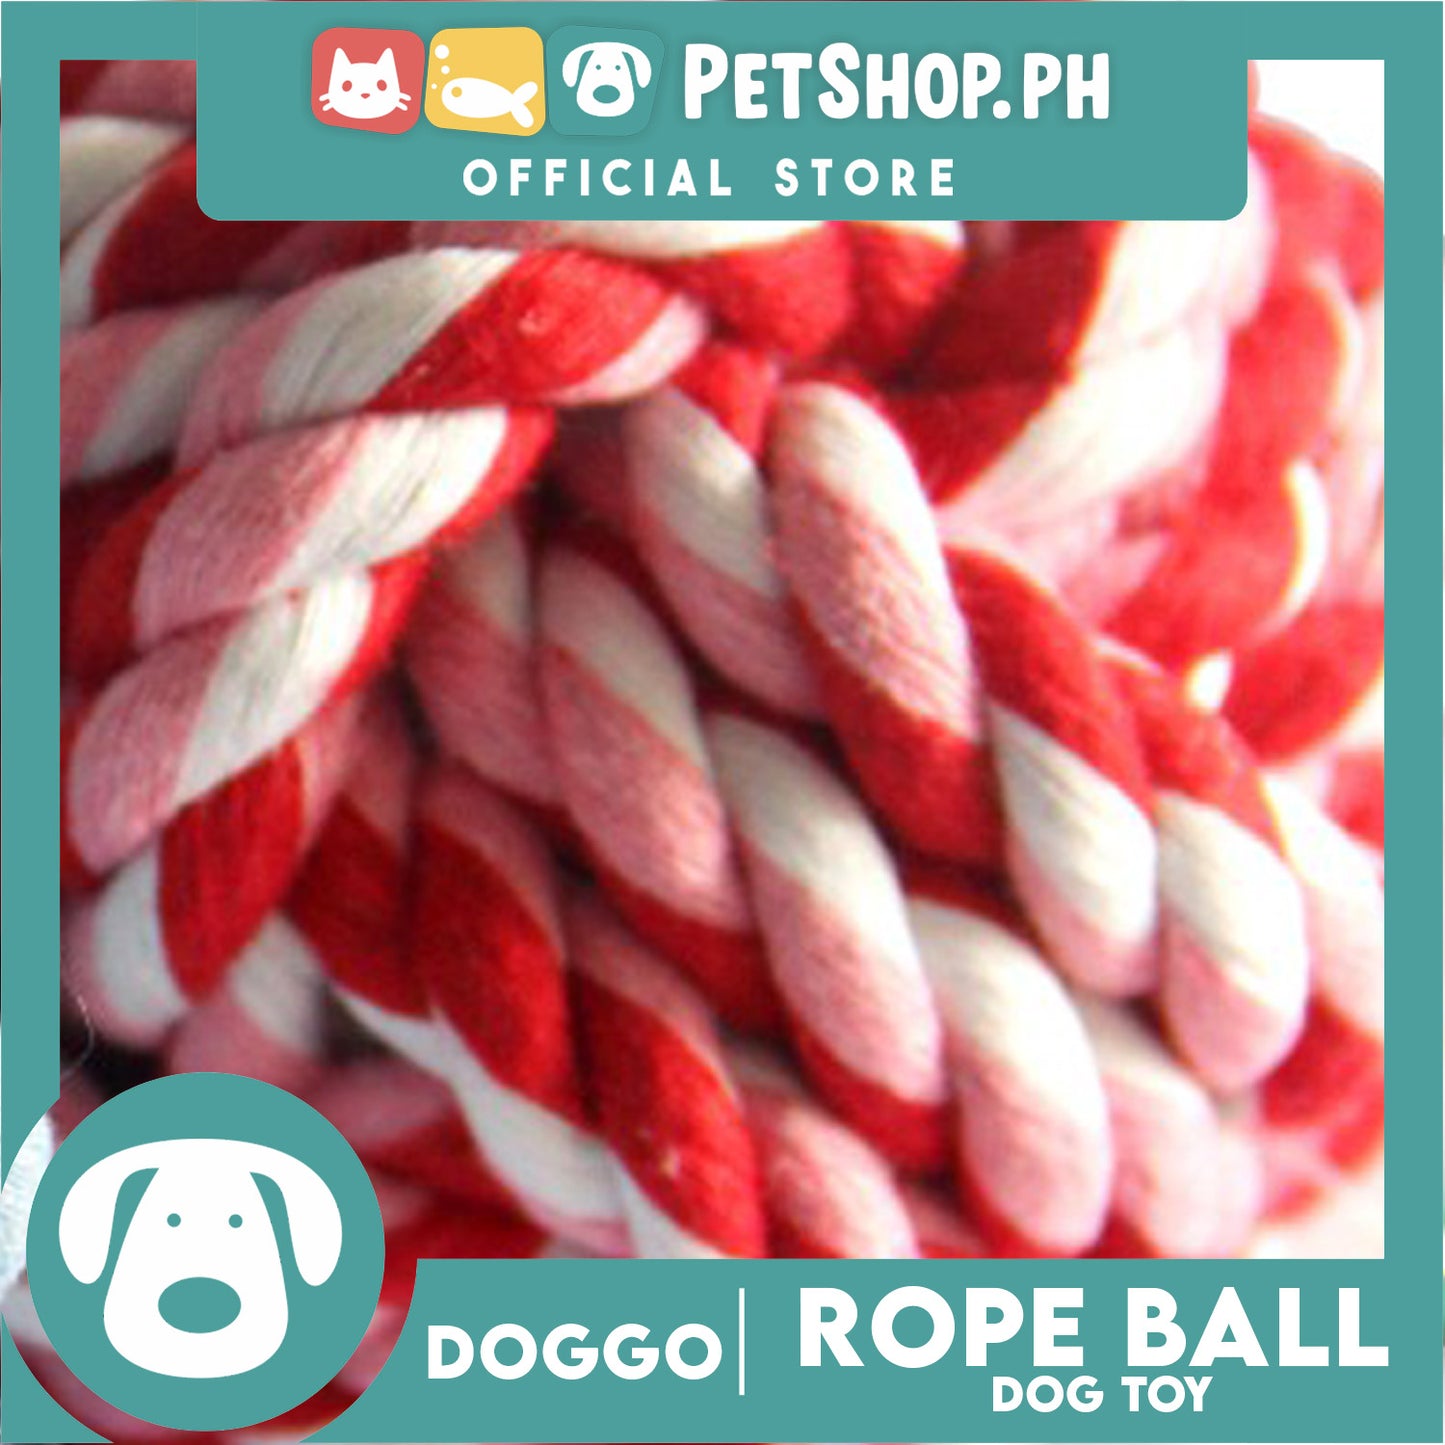 Doggo Rope Ball Small Size (Pink) Perfect Toy for Dog